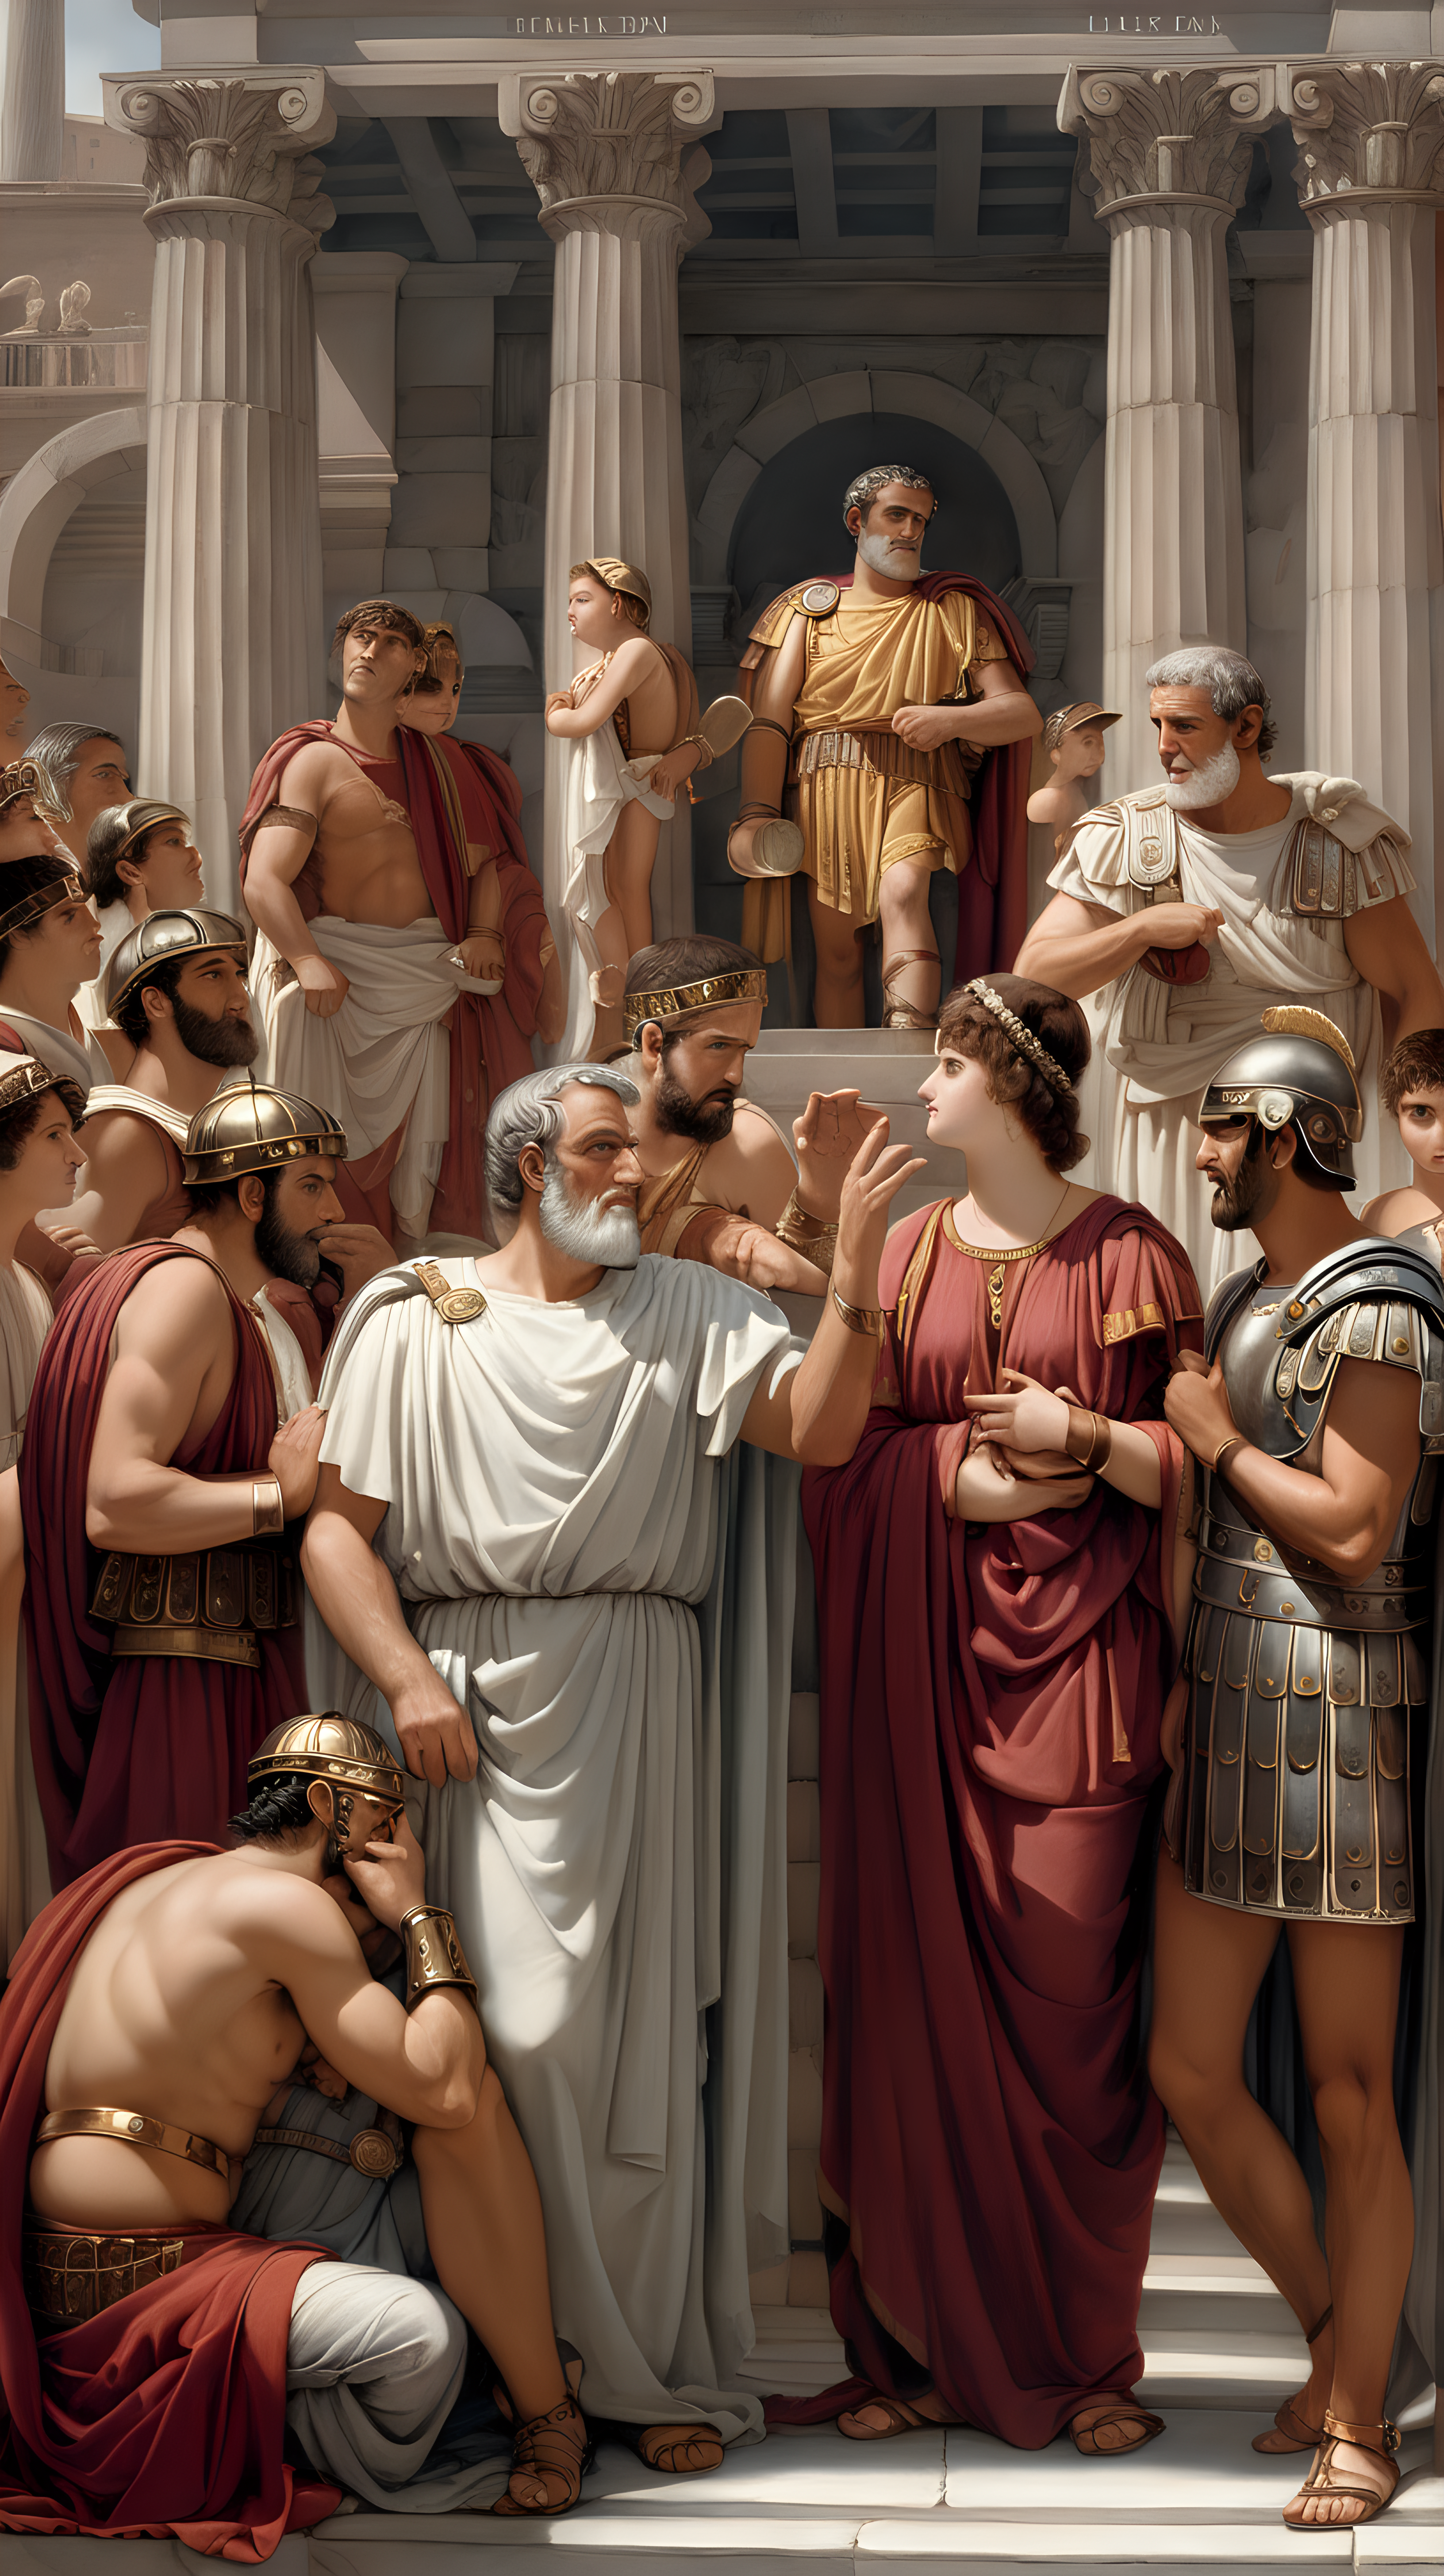 In ancient Rome, the father and his eldest daughter are surrounded by men